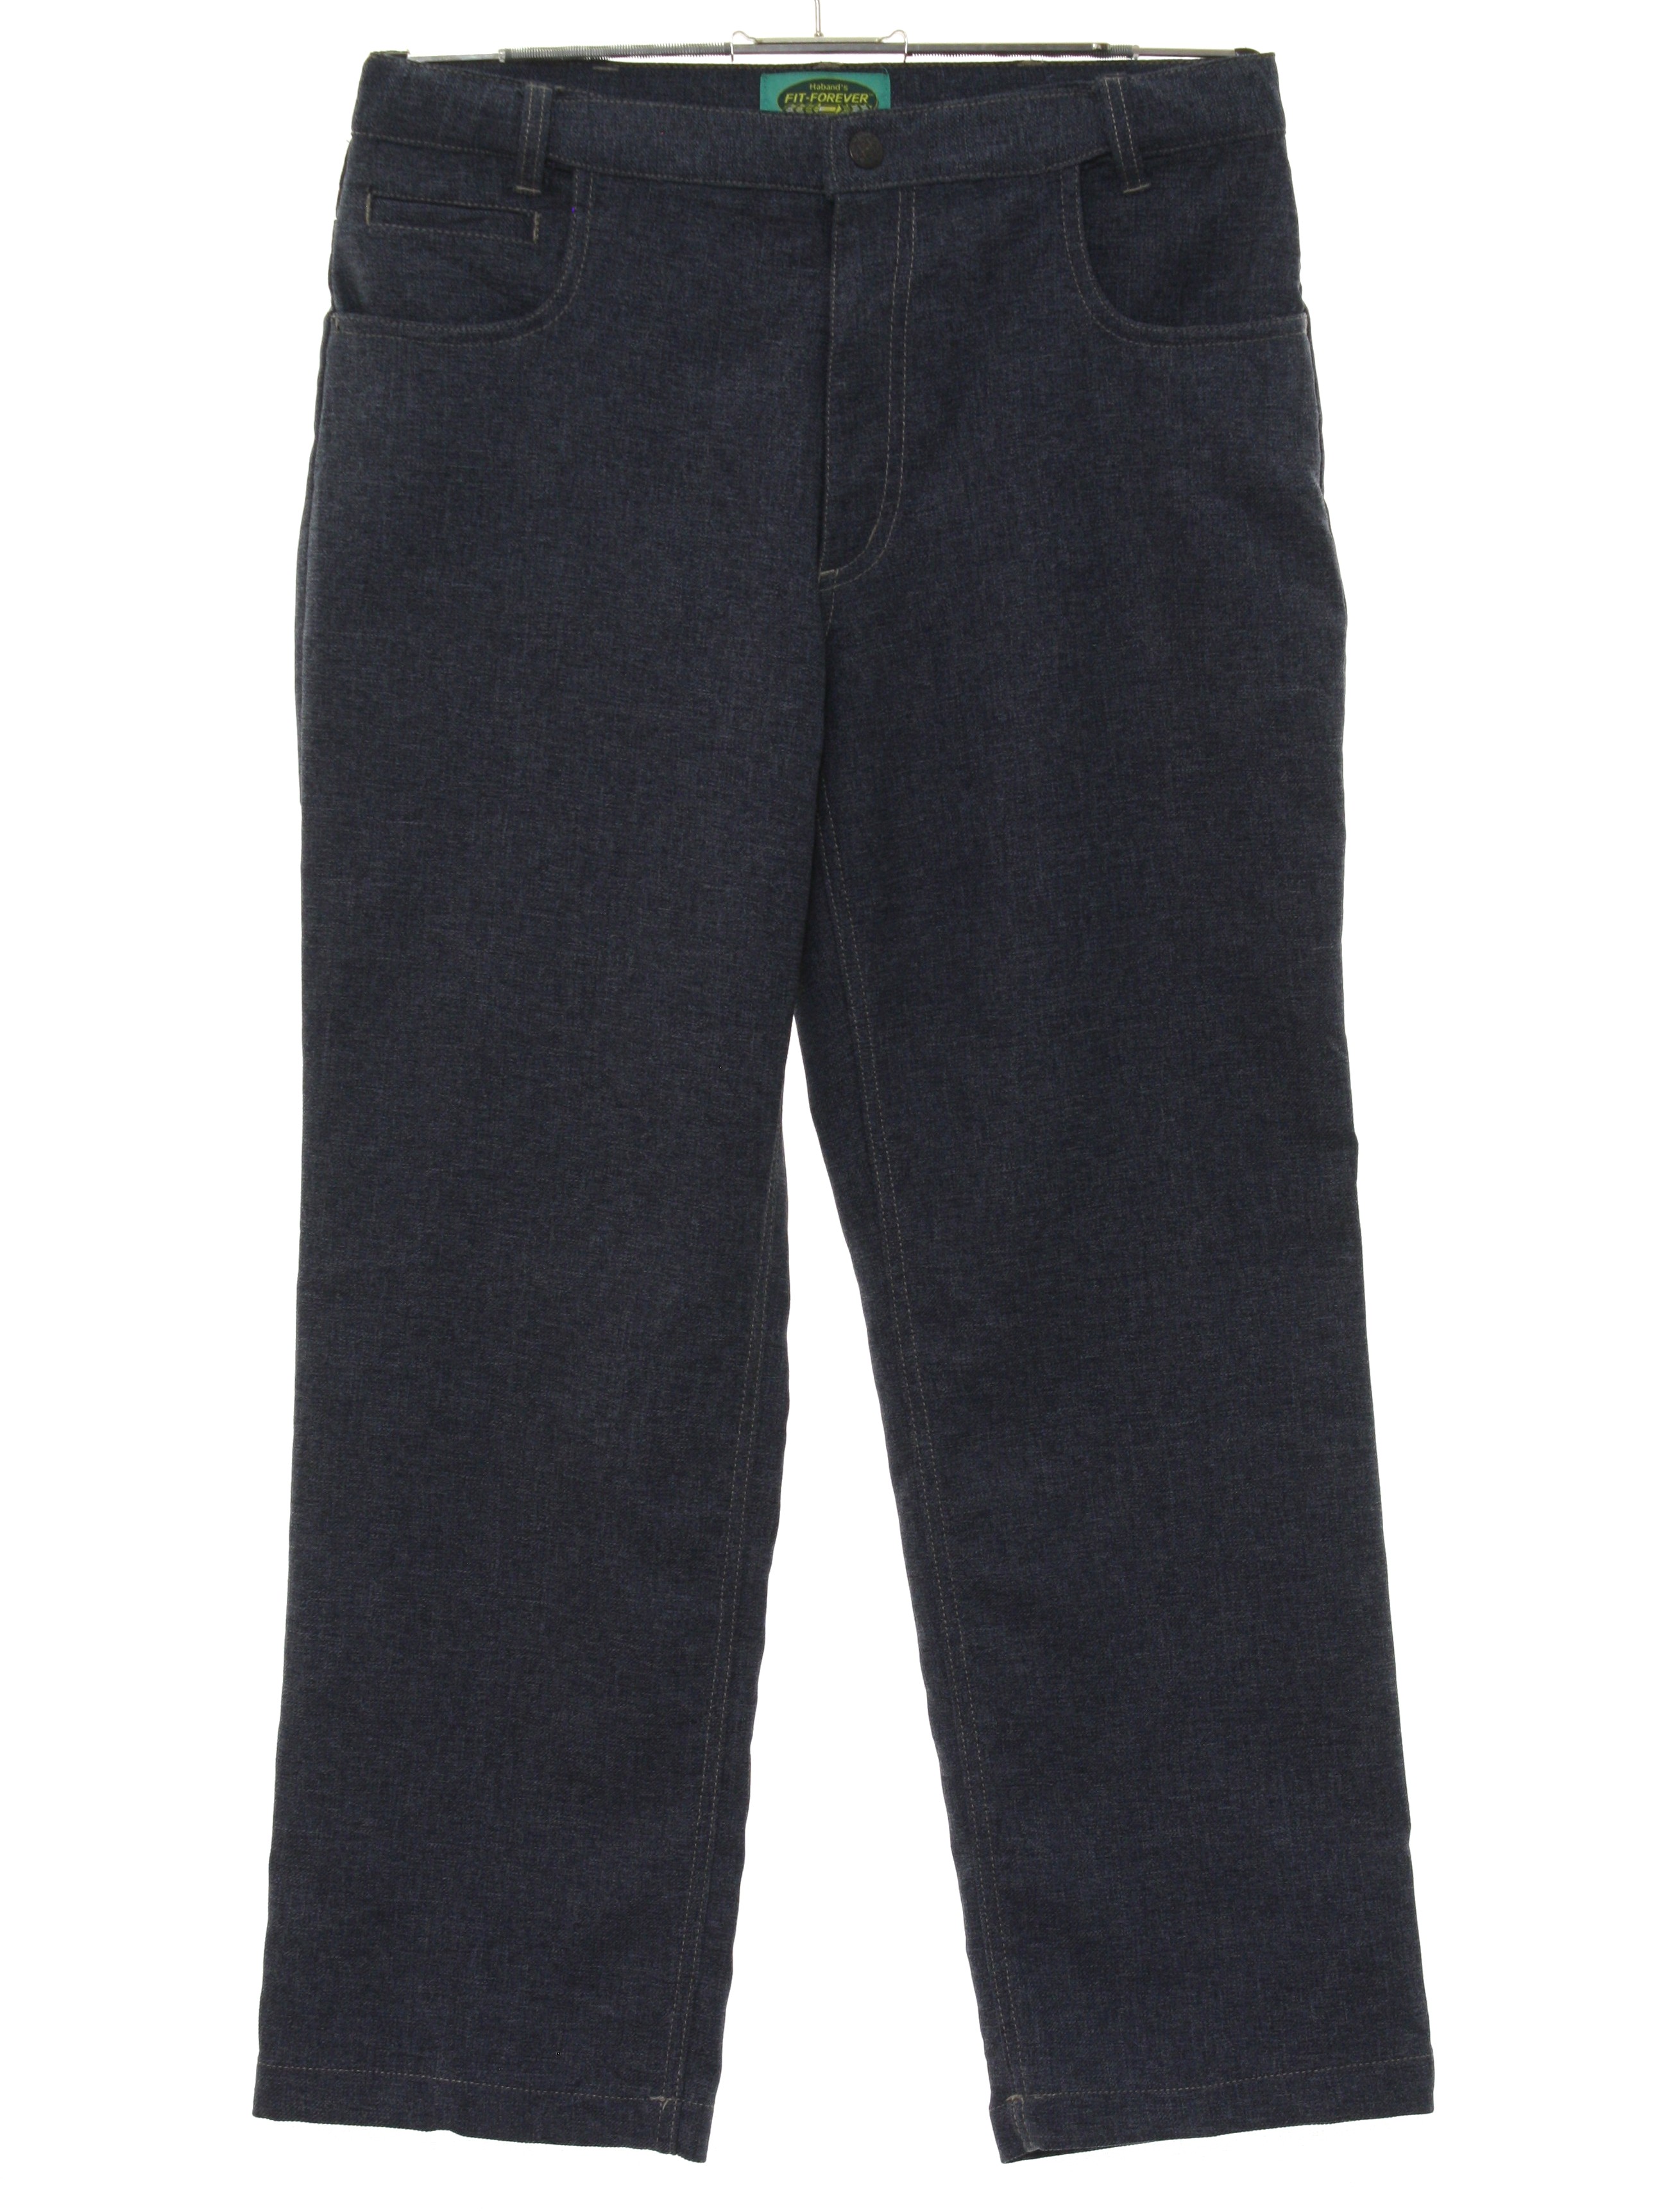 Pants: 90s -Haband Fit Forever- Mens blue and grey heathered denim ...